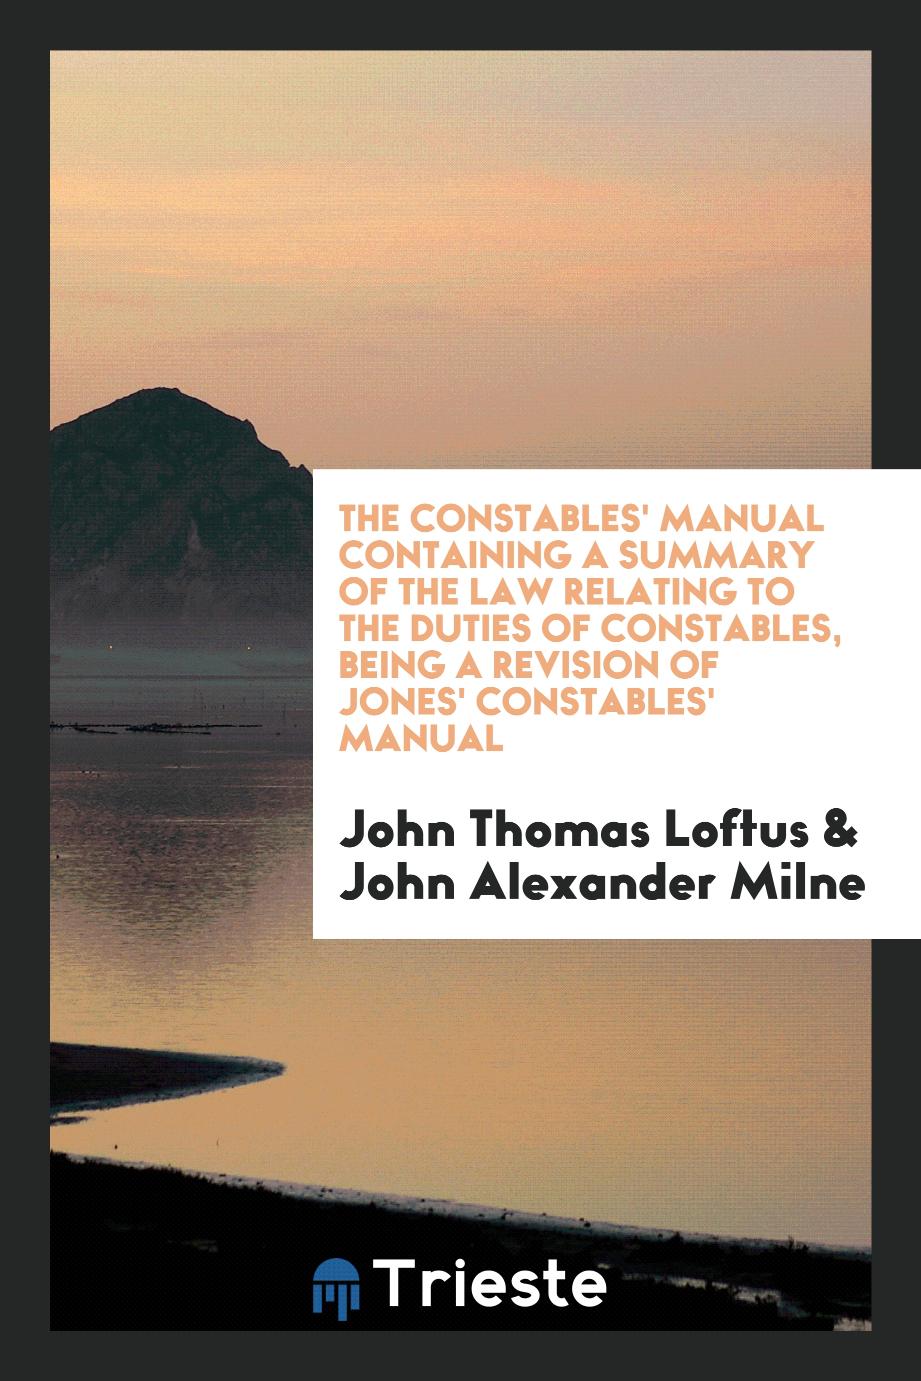 The constables' manual containing a summary of the law relating to the duties of constables, being a revision of Jones' constables' manual